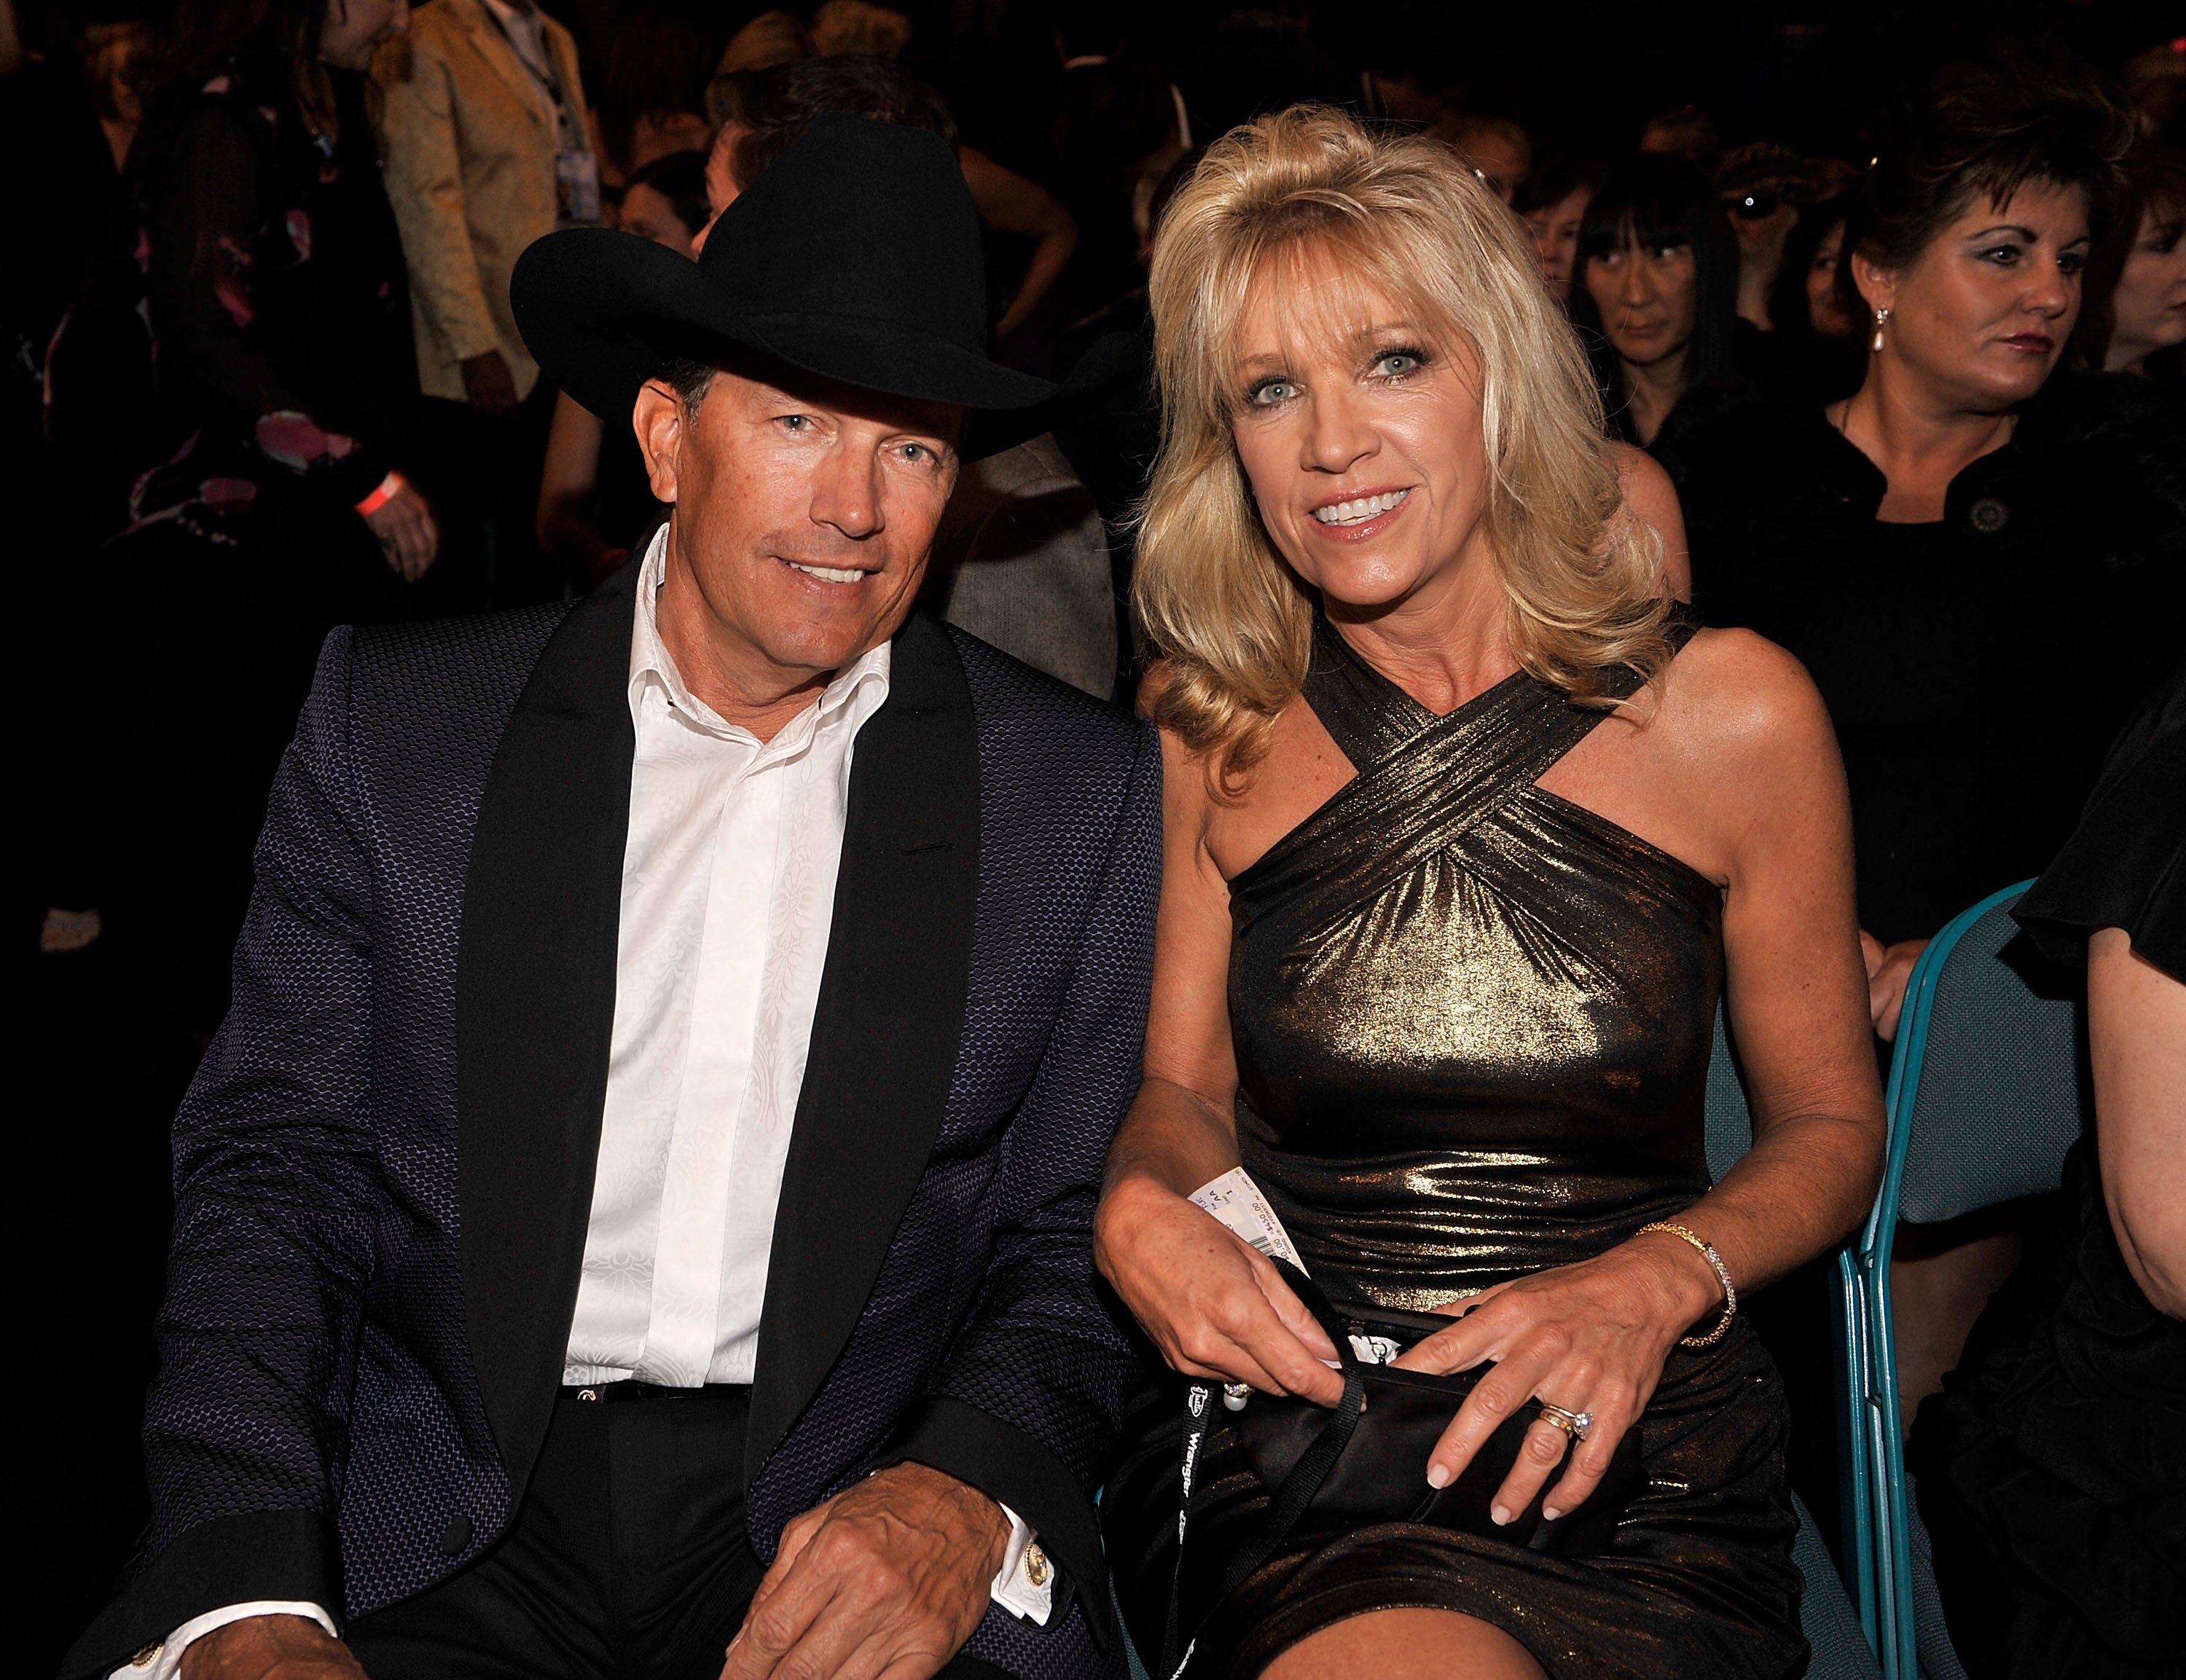 George Strait and wife Norma Strait pose during the 44th annual Academy Of Country Music Awards held at the MGM Grand on April 5, 2009 in Las Vegas, Nevada | Source: Getty Images 